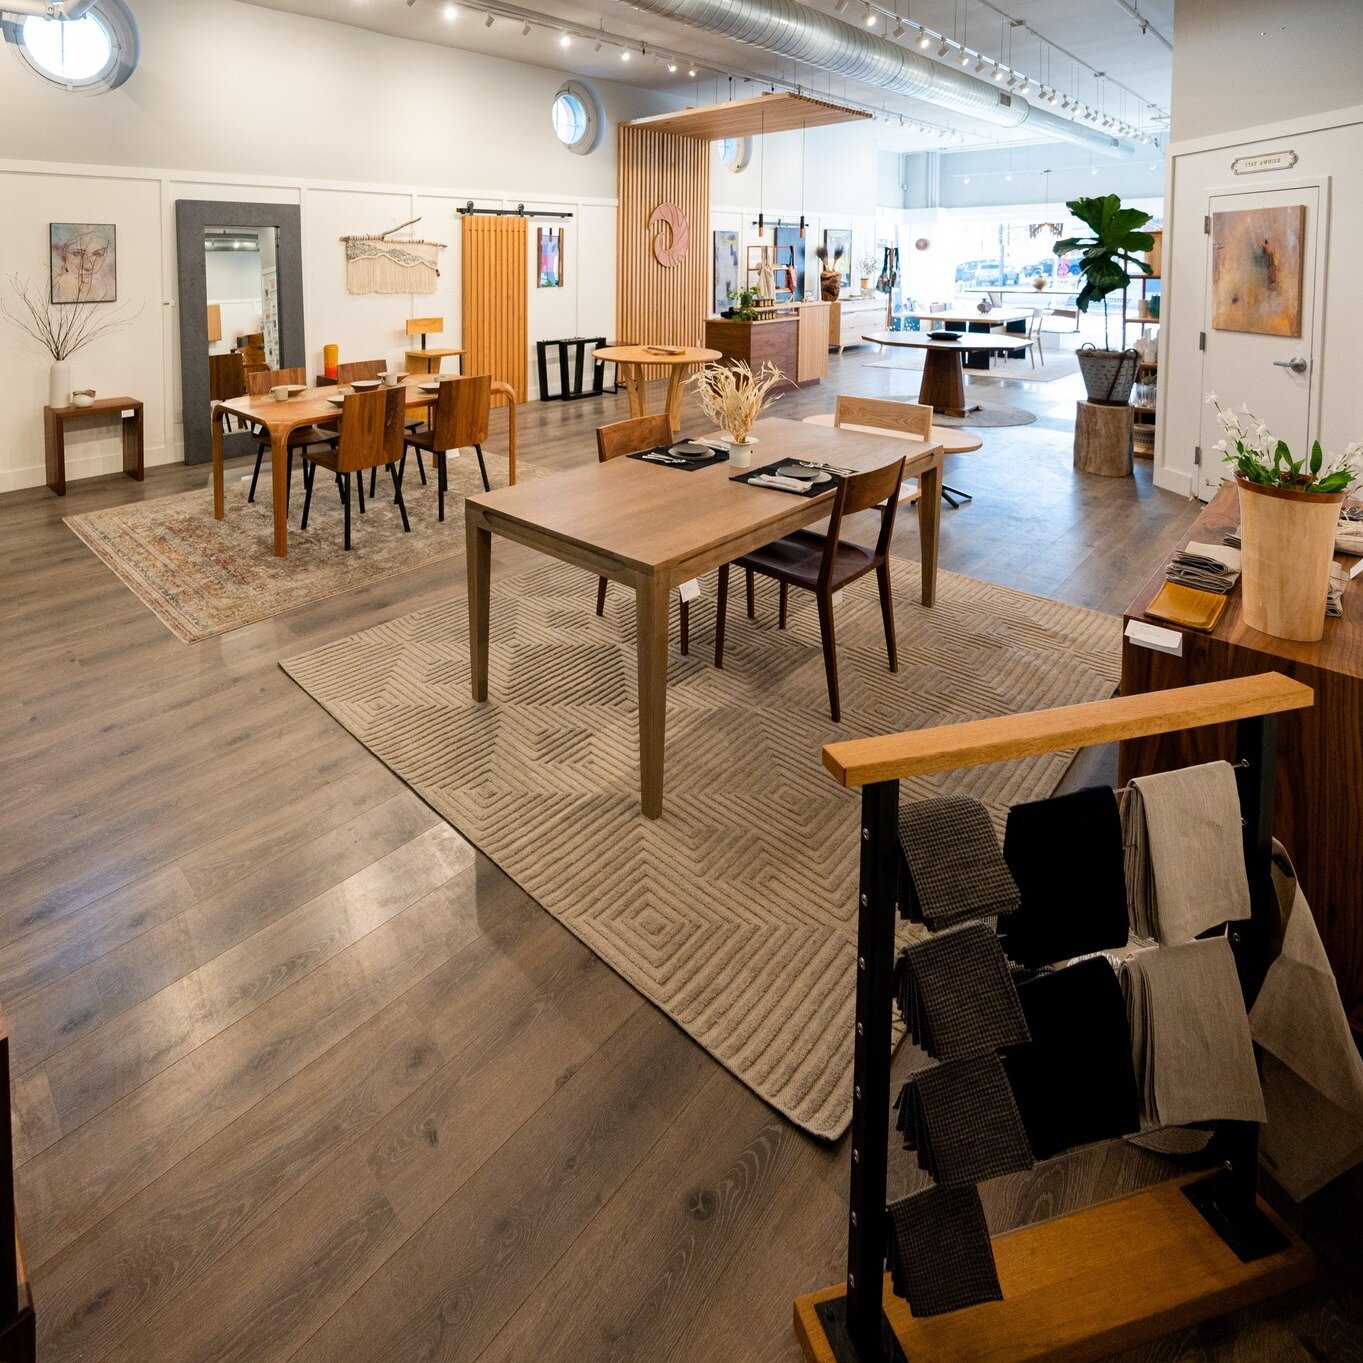 We have only a few days left in our current showroom located on Pearl St in downtown Boulder. It has been a pleasure being a part of downtown, and we are excited about the next chapter.
▫
▫
▫
▫
#FurnitureStore #DowntownBoulder #HandmadeFurniture #Int